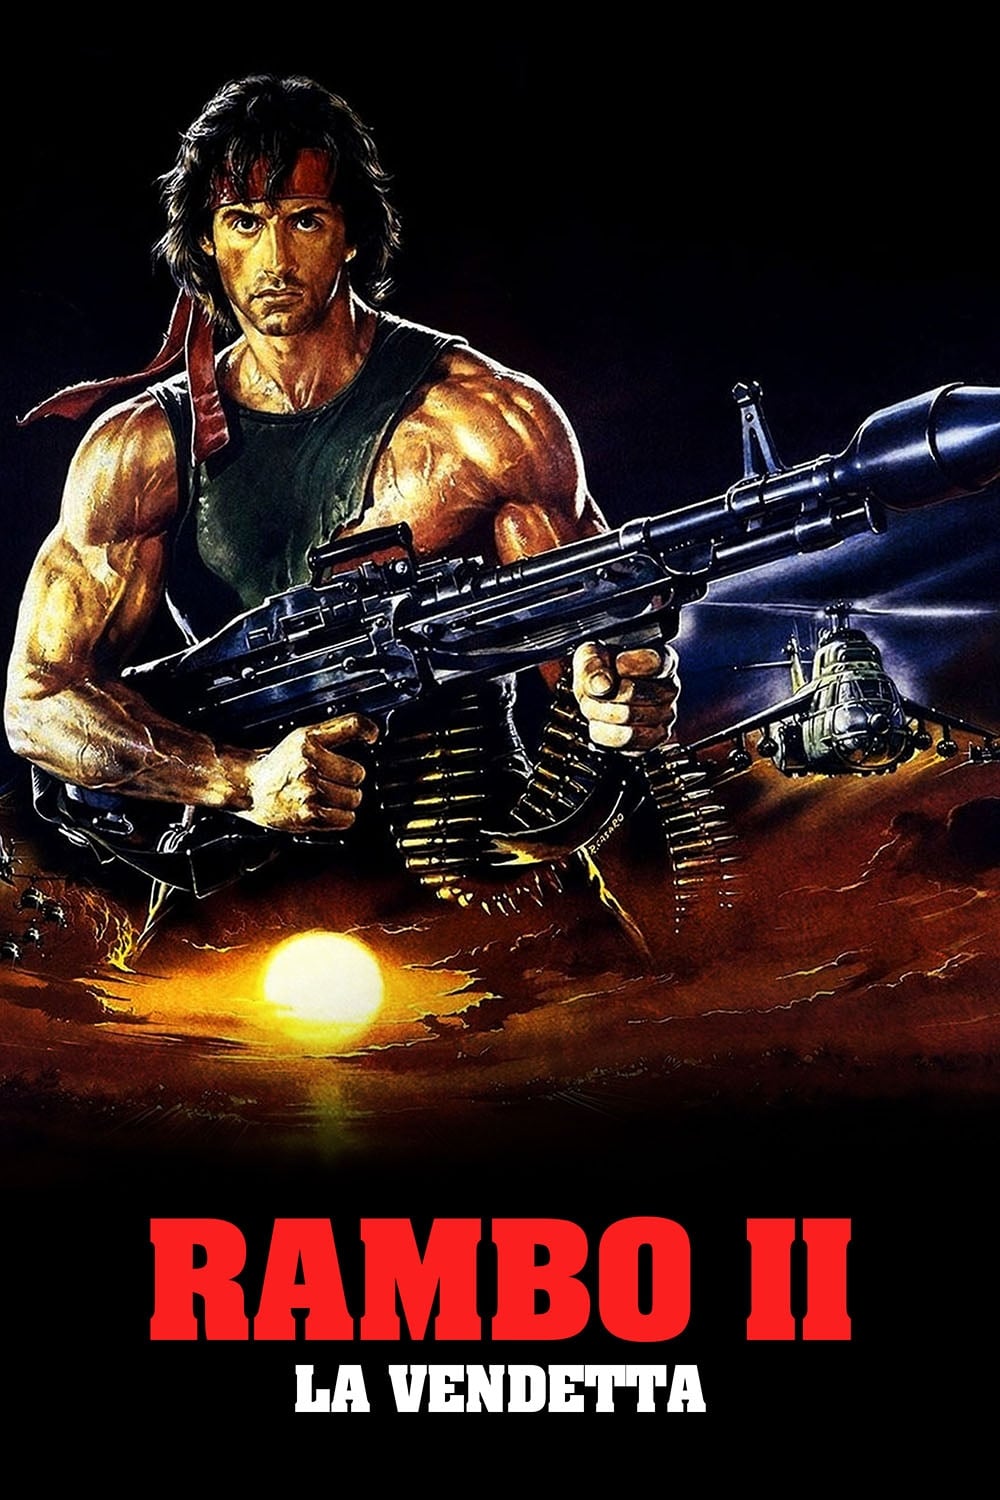 rambo first blood video game download free